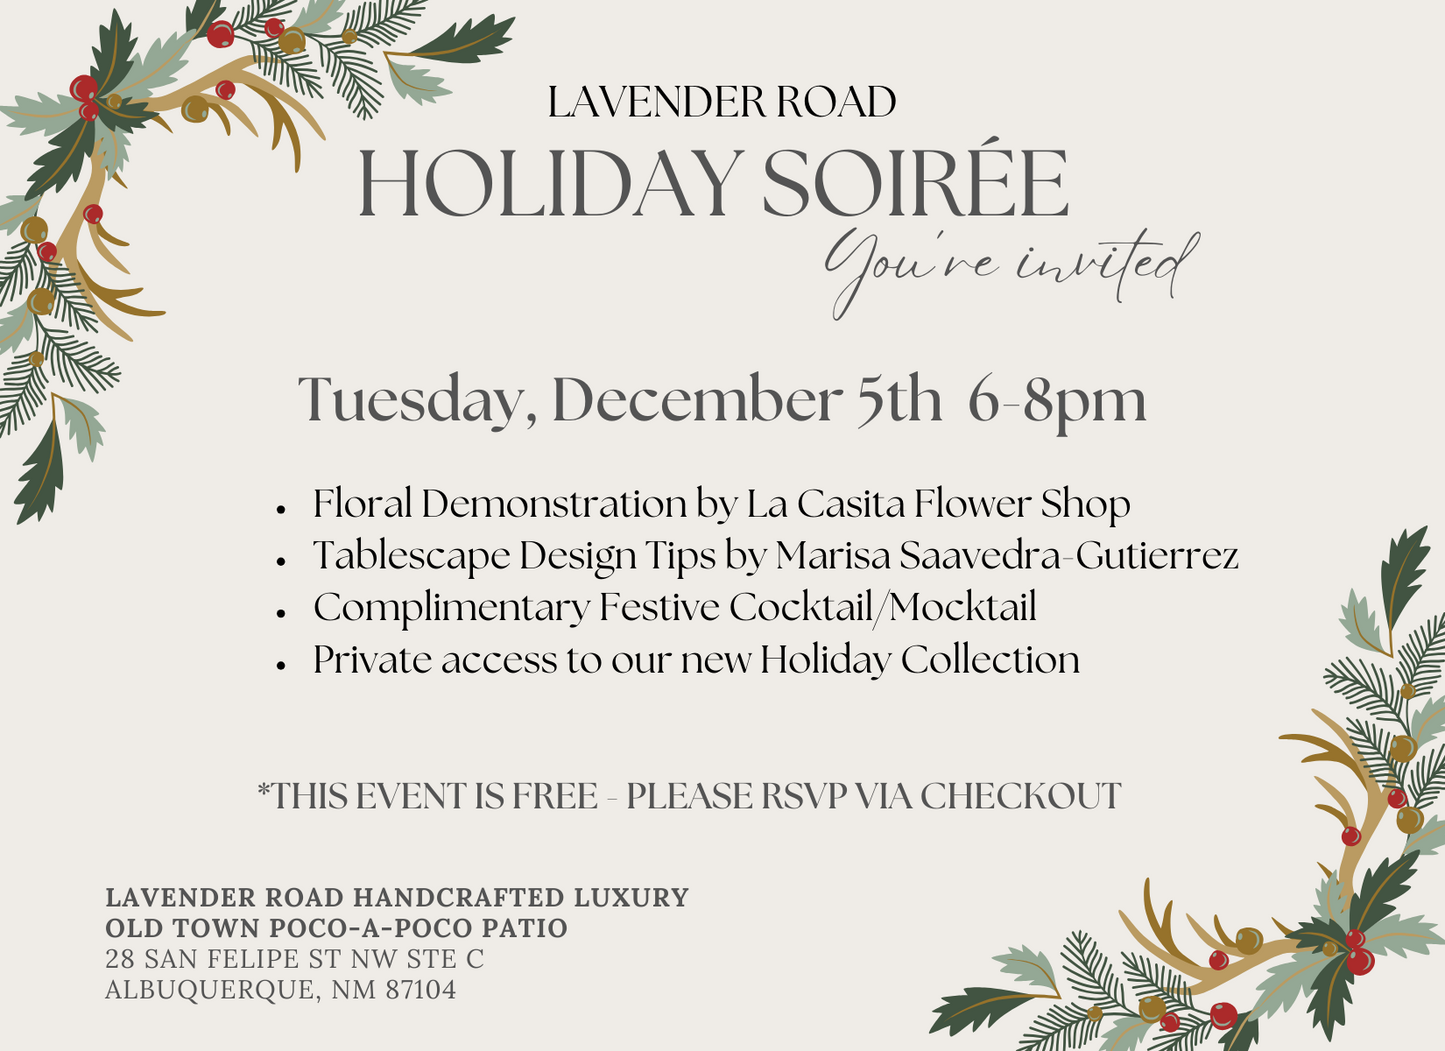 Holiday Soirée: Tuesday, December 5th 6-8pm (FREE)